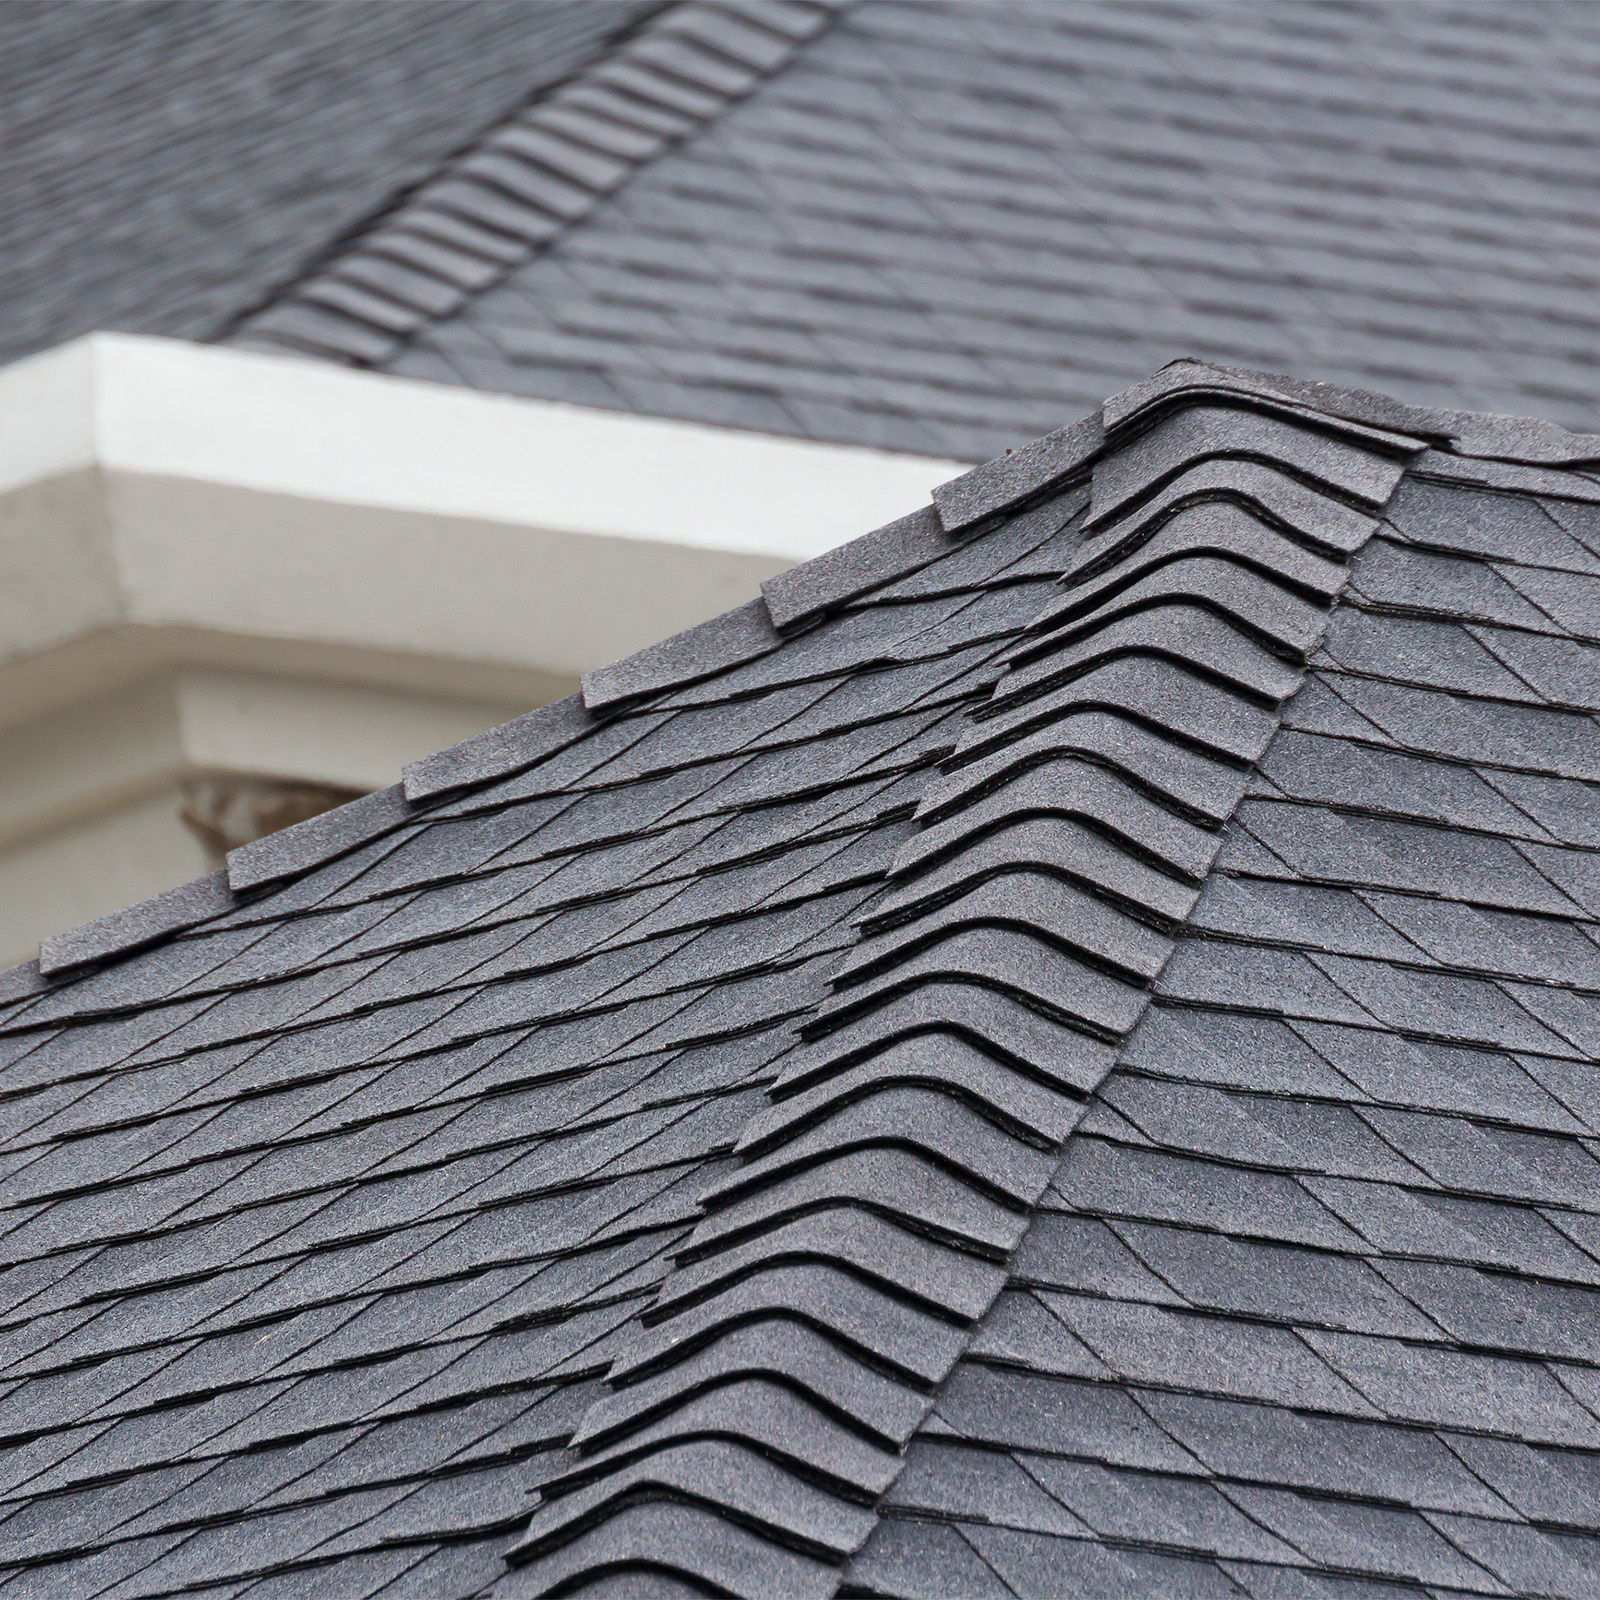 edge of Roof shingles on top of the house, dark asphalt tiles on the roof background. Bay